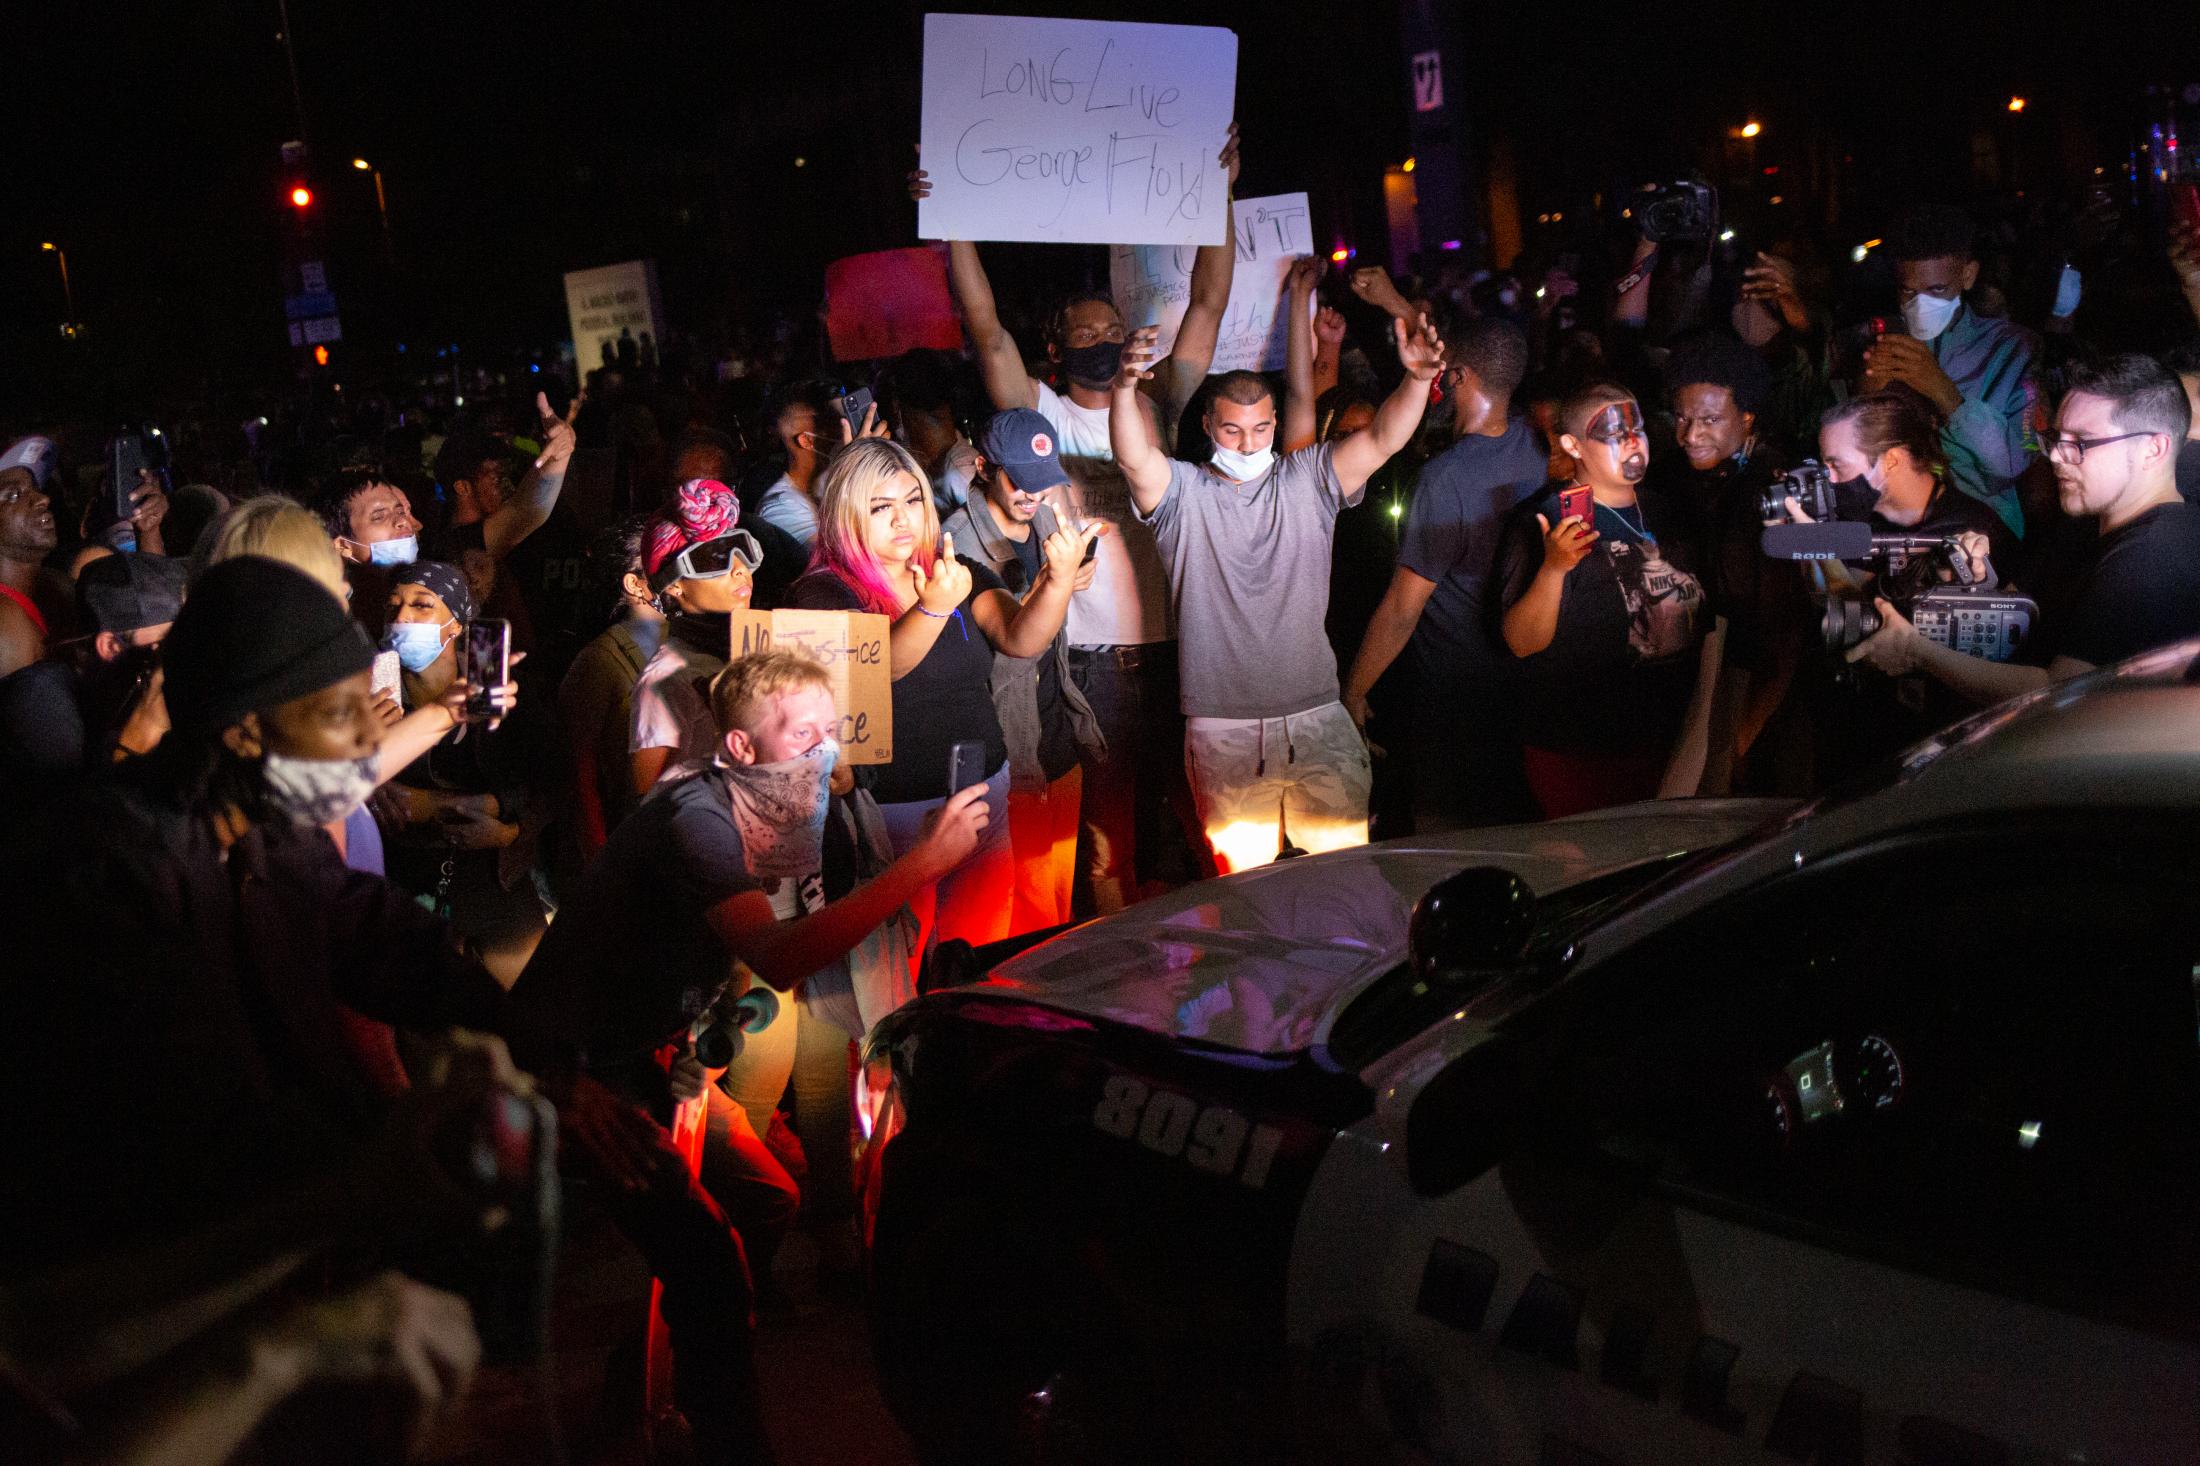 Unrest Dallas - A crowd storms around a police cruiser with signs and...